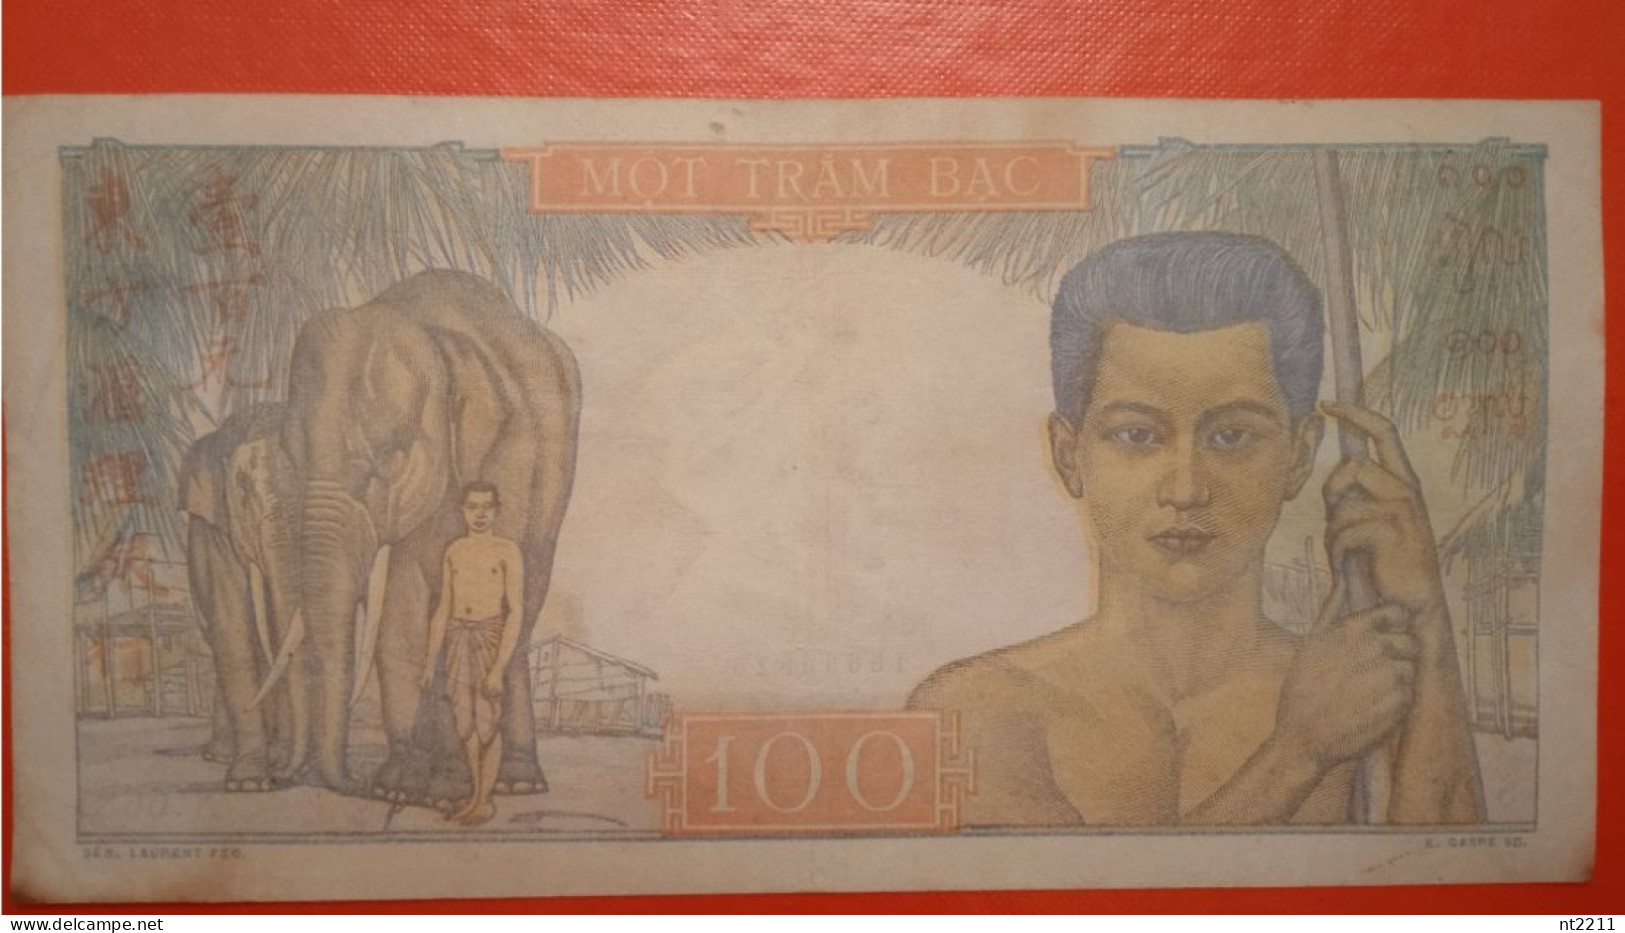 Banknote 100 Piastres French Indochina - Indochina